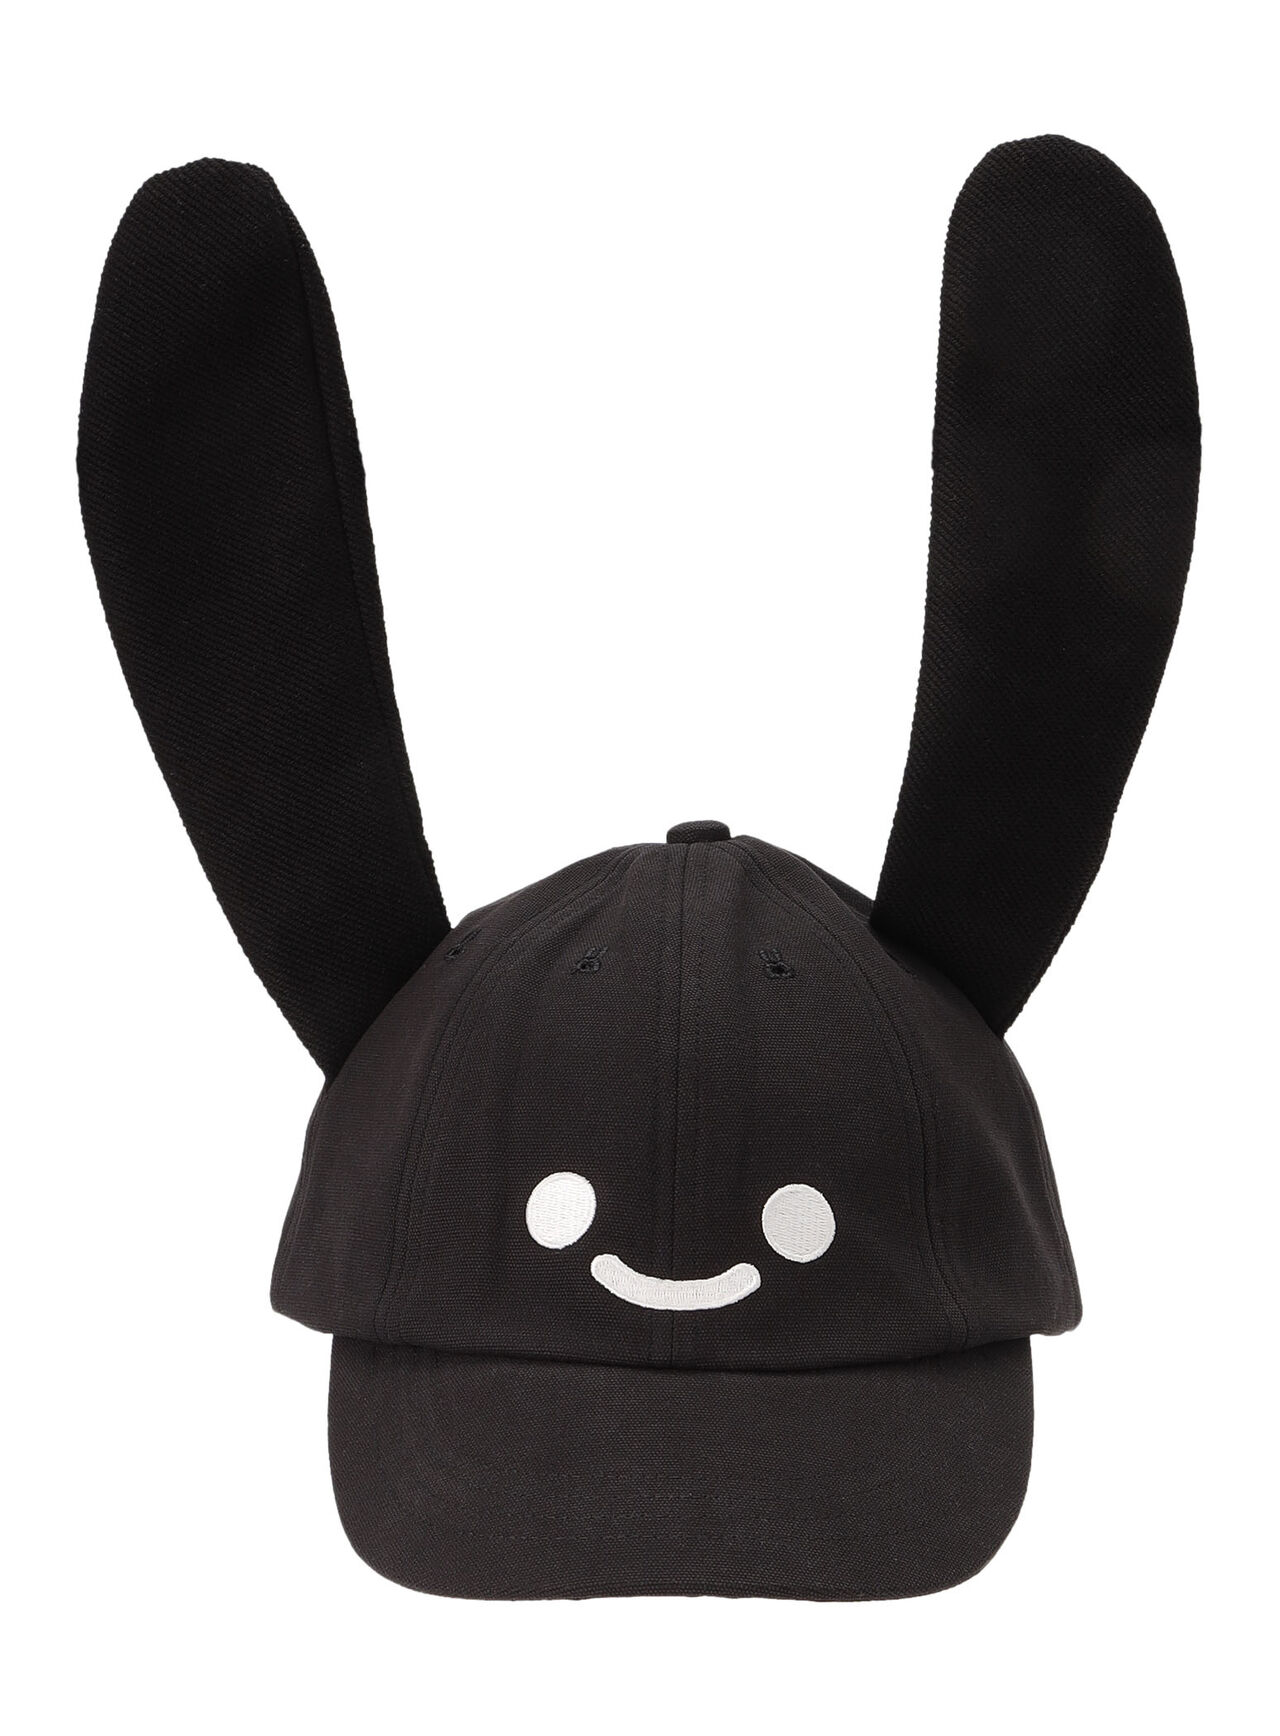 Rabbit Eared Cap,ONE, large image number 7